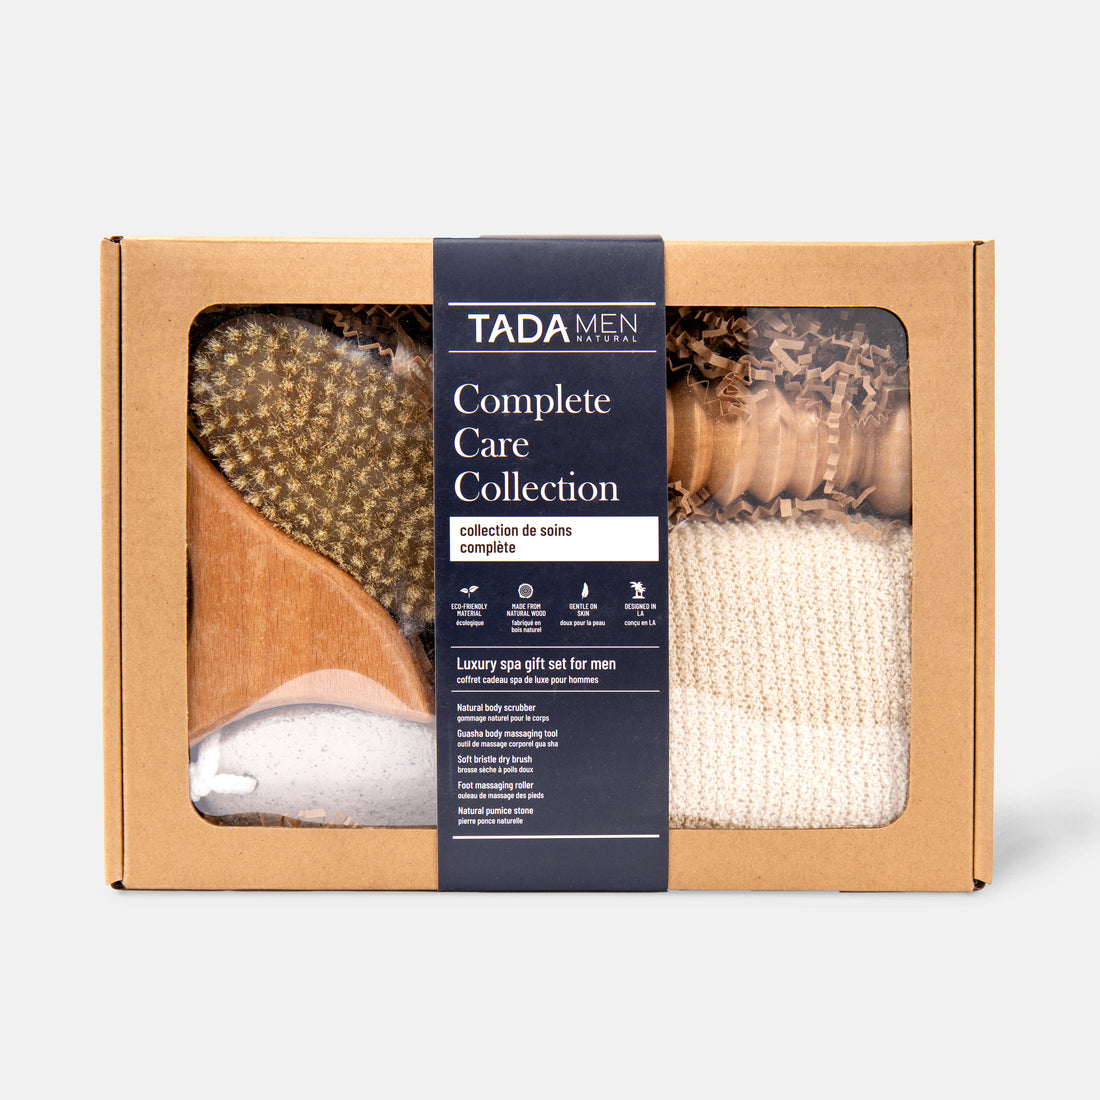 TADA Men | Complete Care Collection